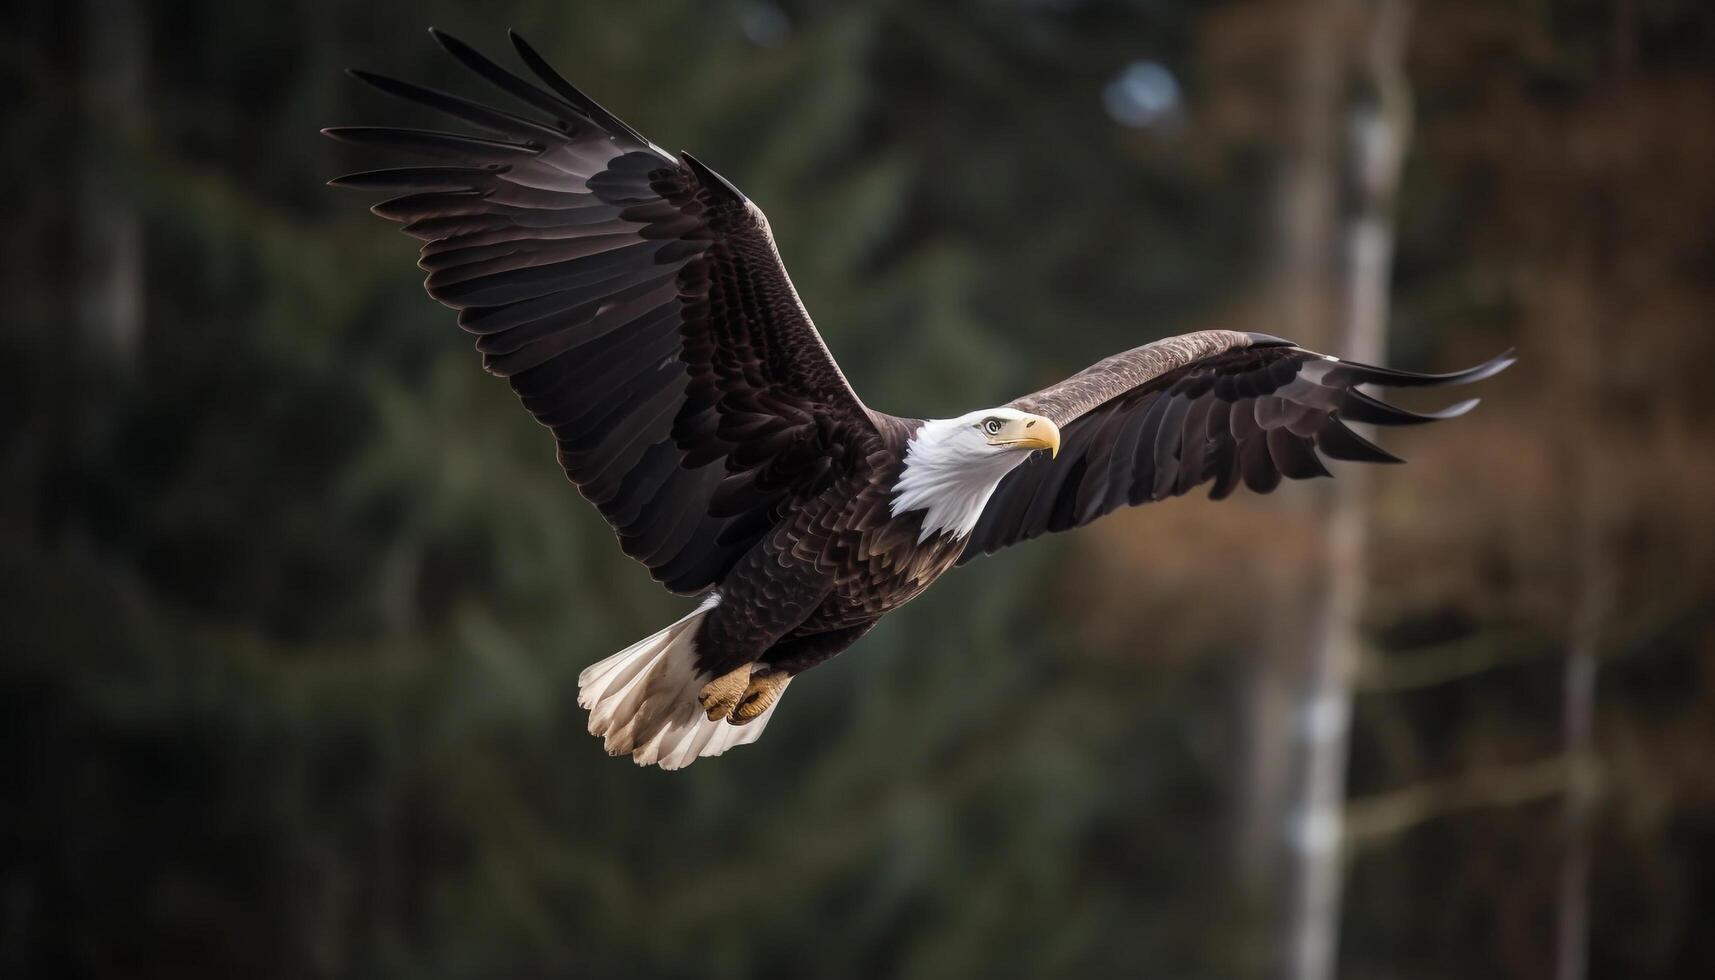 Bald eagle spreads majestic wings in flight generated by AI photo